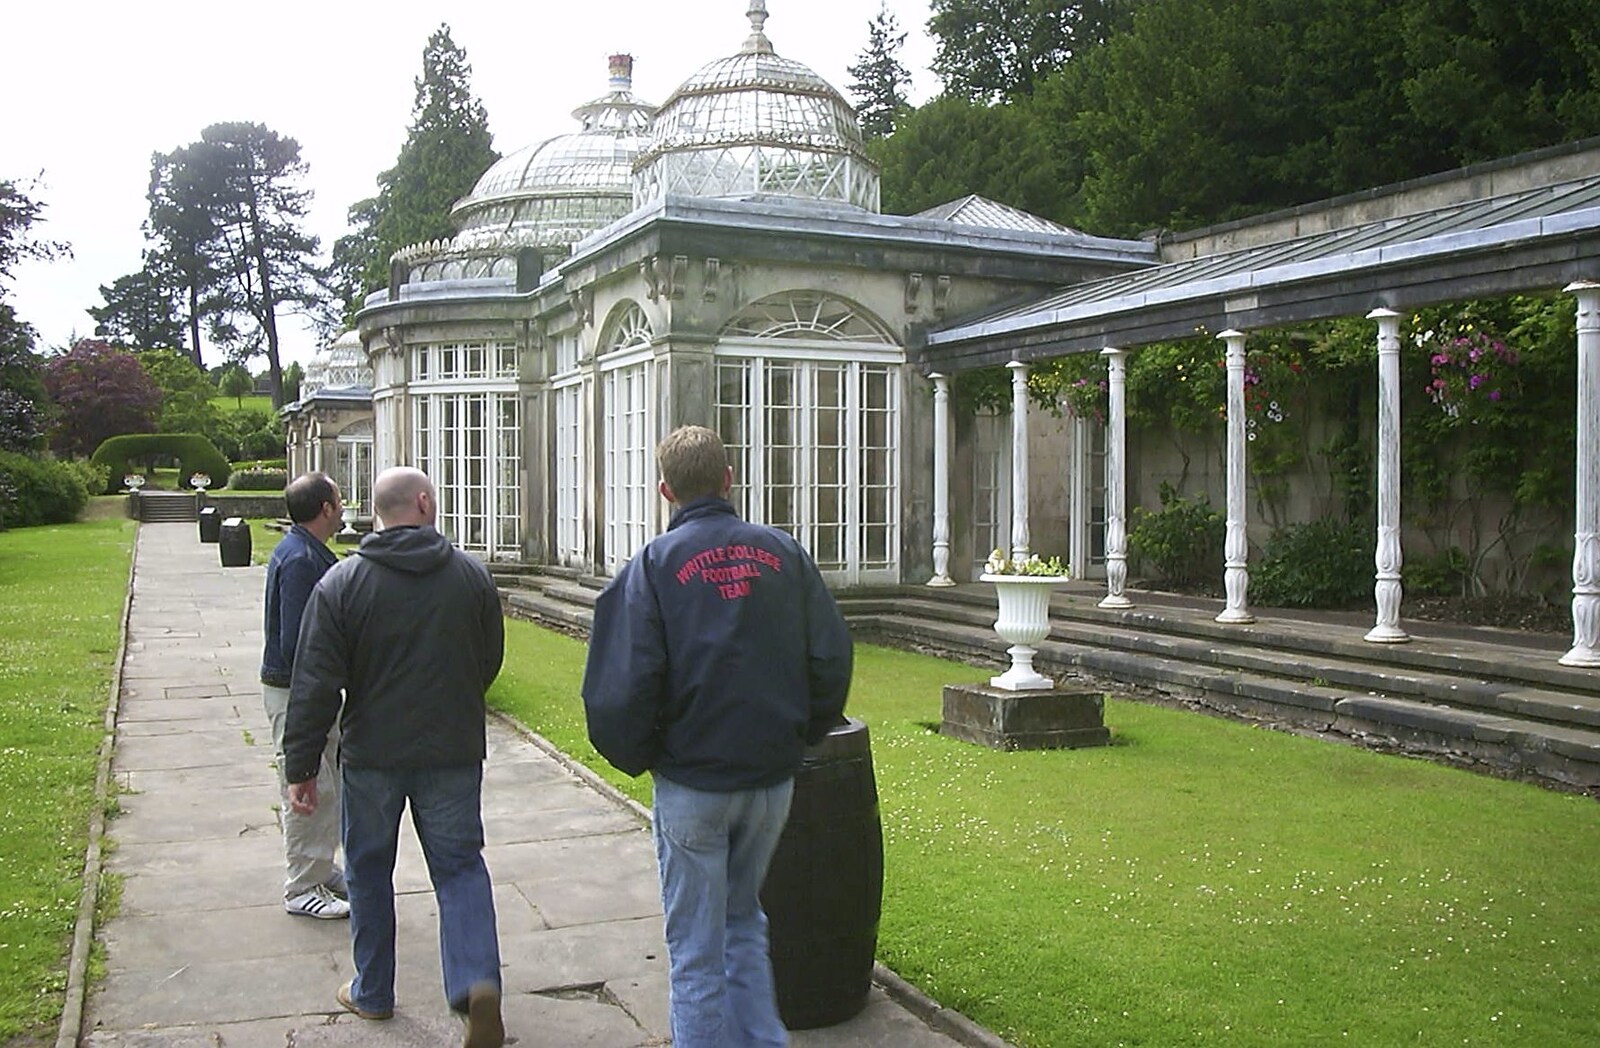 Walking past the orangery from A Trip to Alton Towers, Staffordshire - 19th June 2004